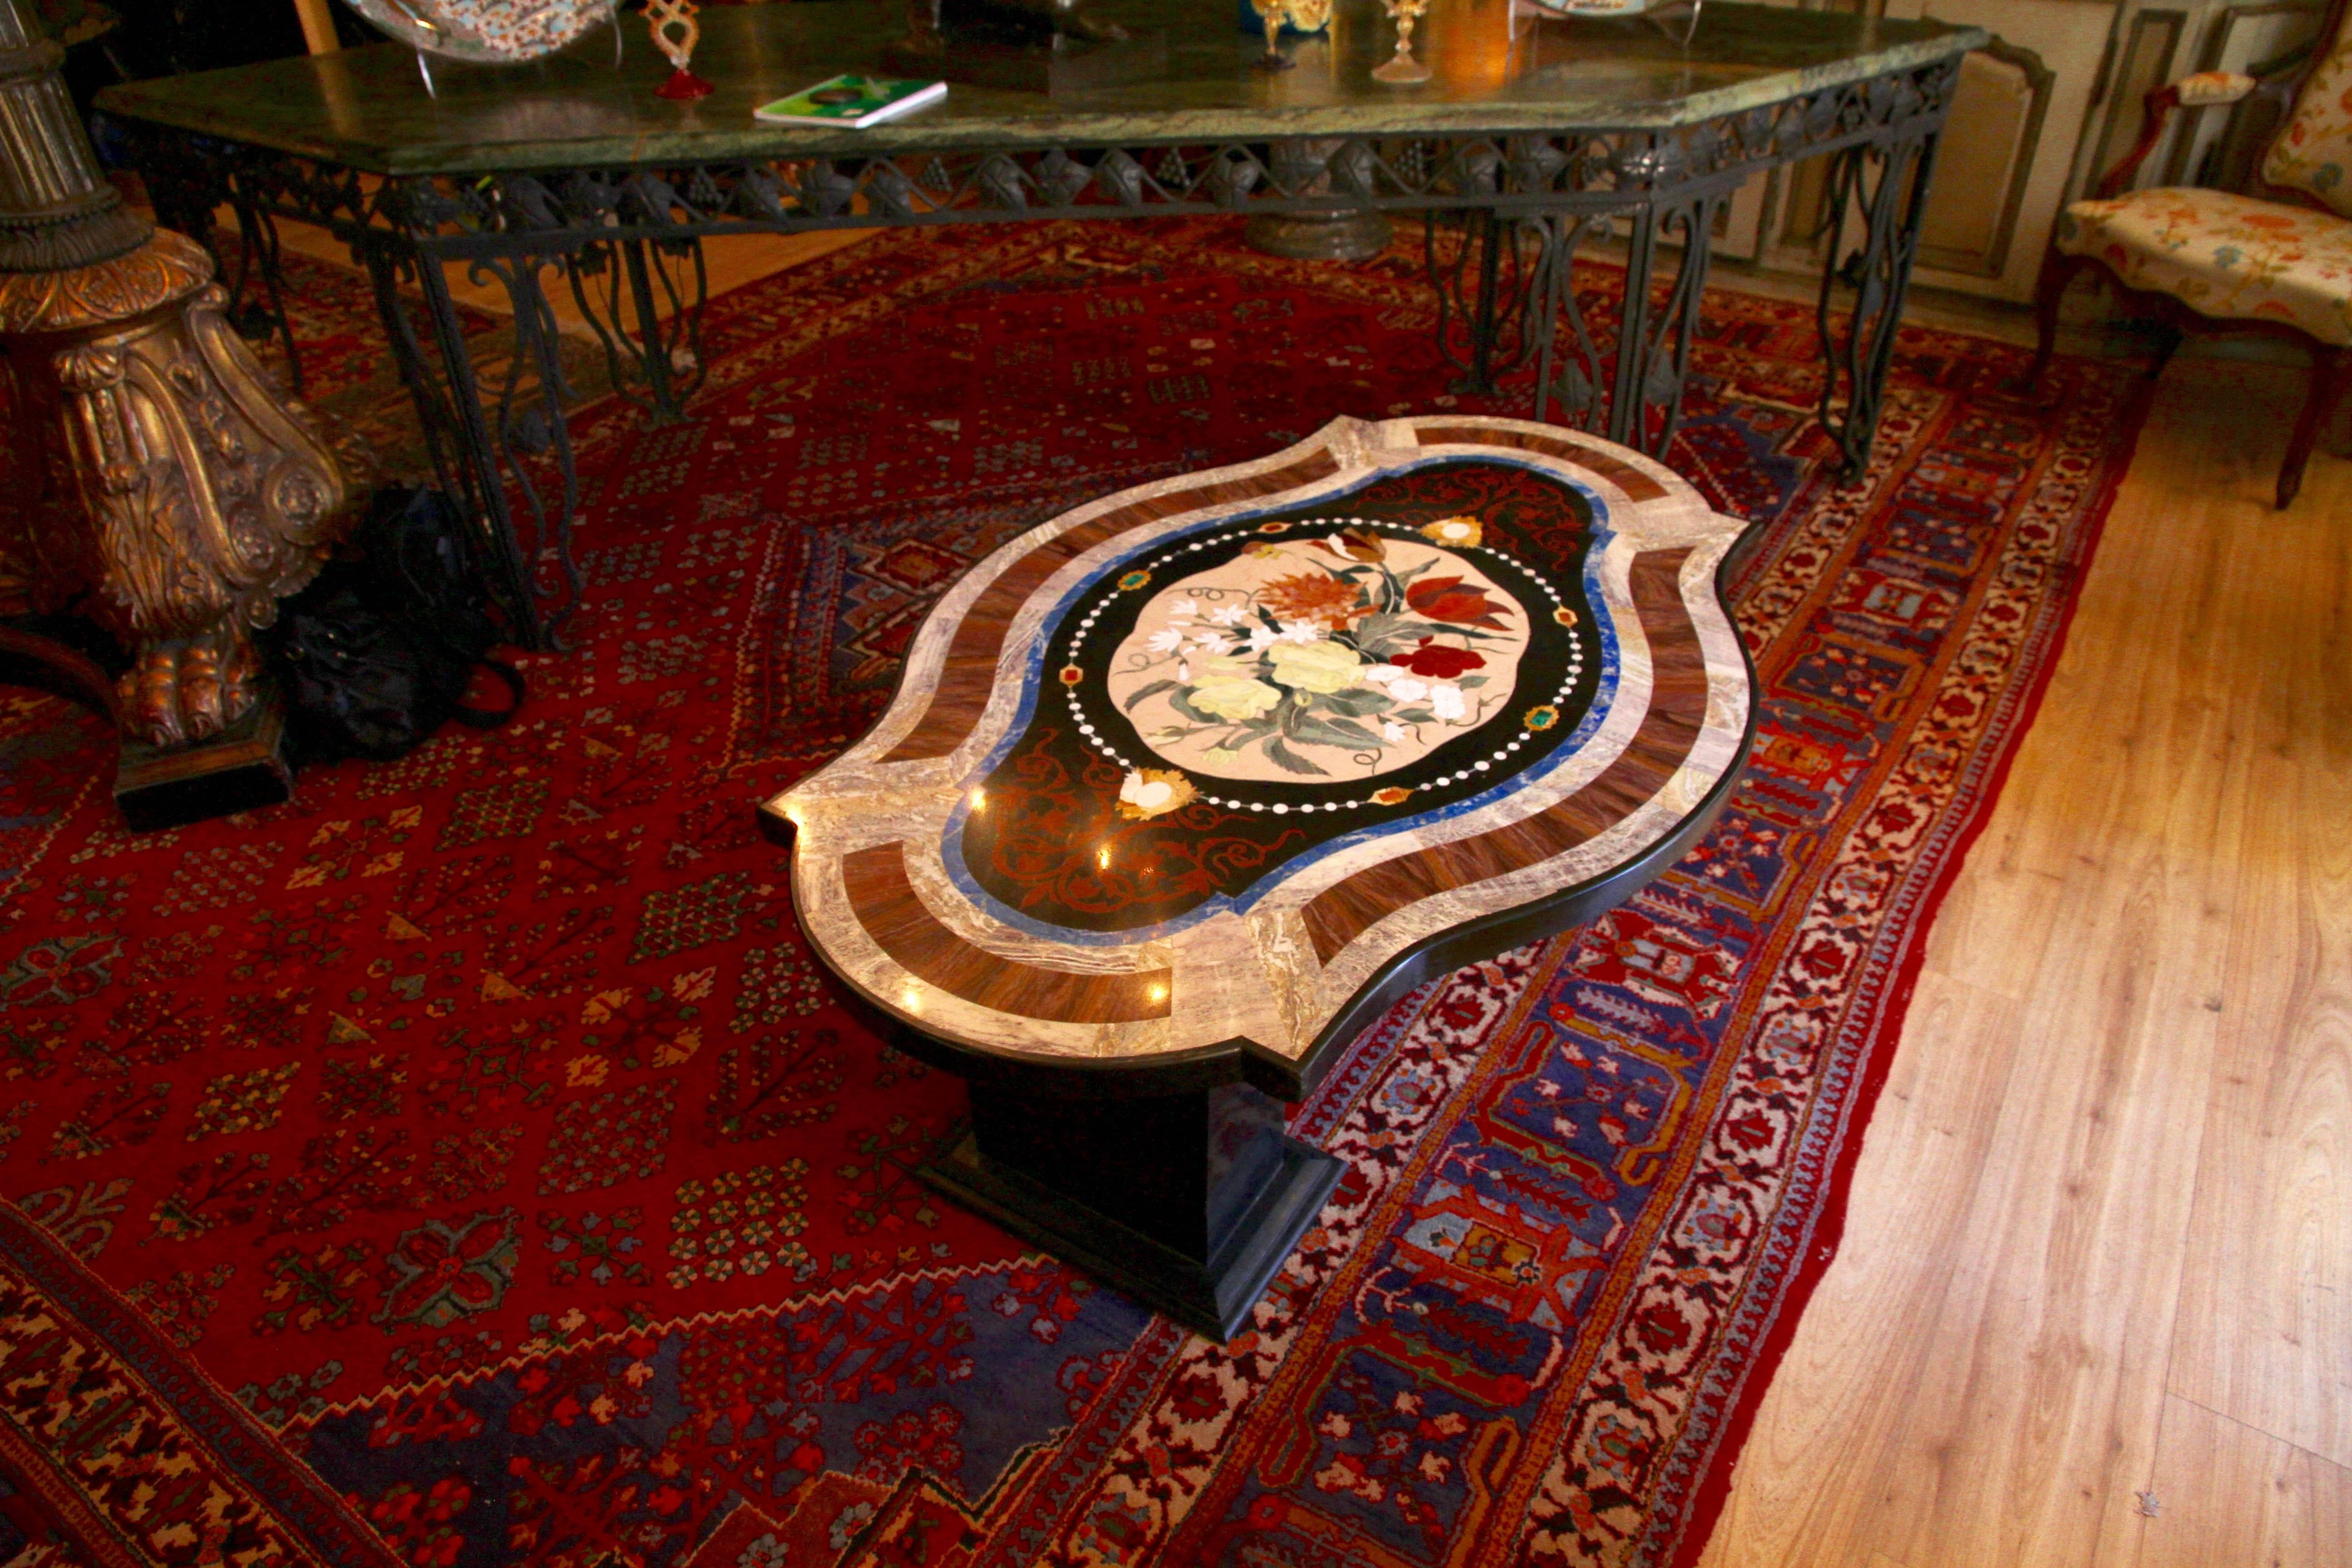 Coffee table in Pietre dure marquetery with a slightly lively shape using different semi-precious stones such as malachite, lapis lazuli, black Belgium marble, red jasper, chalcedony, yellow Sienna marble, white agate, cornelian, pink Portuguese